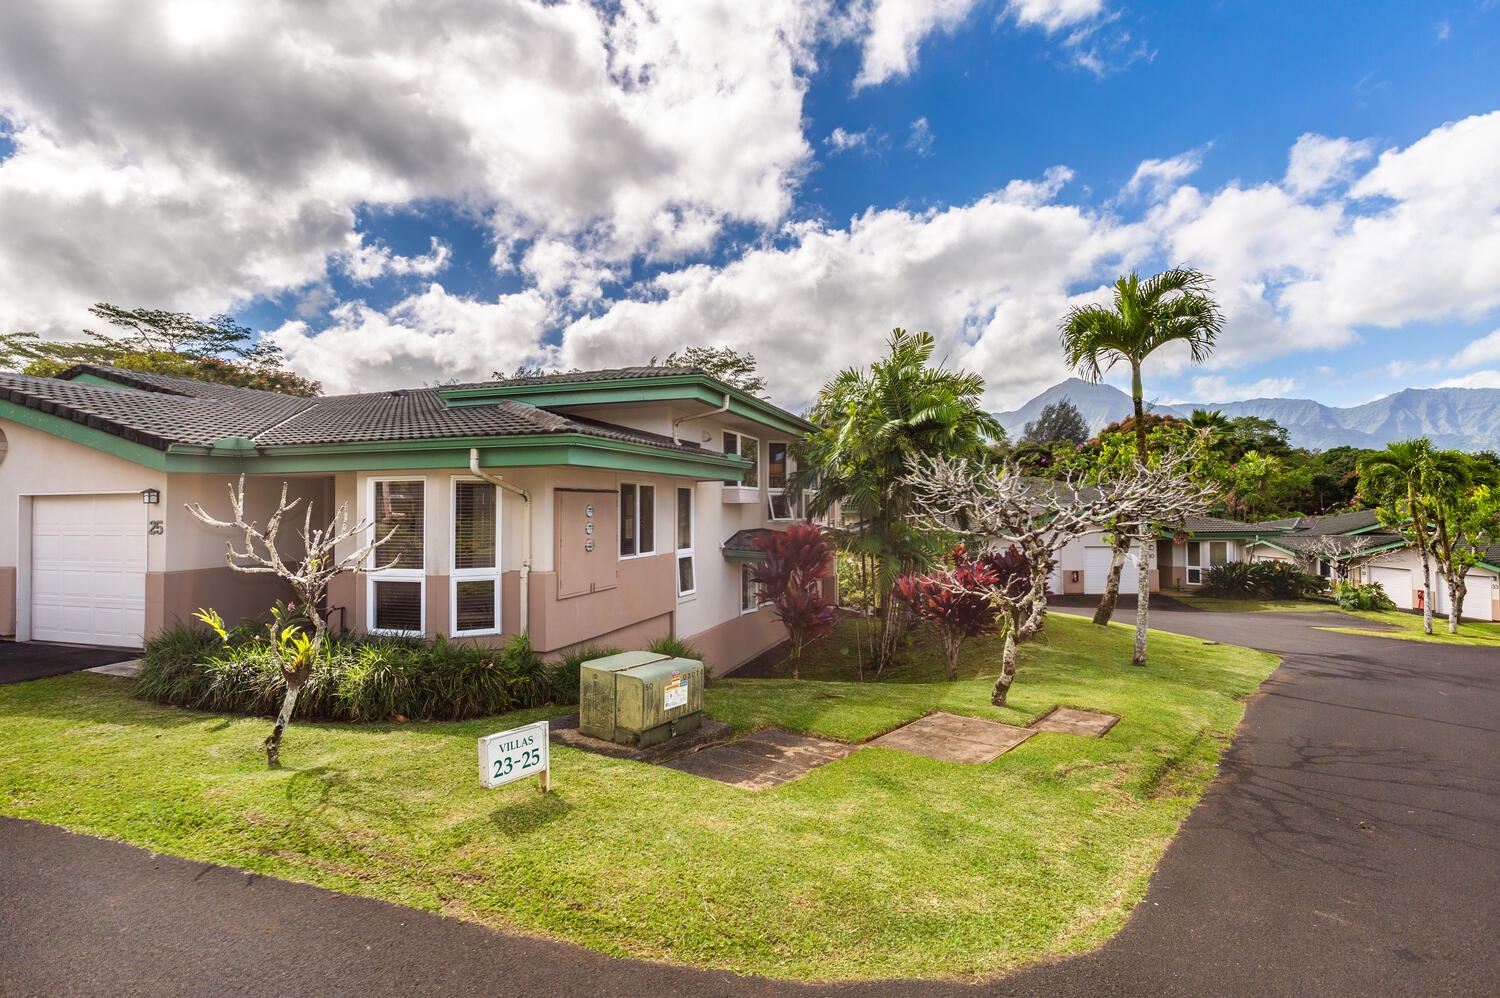 Princeville Vacation Rentals, Sea Glass - With lush green front lawn.